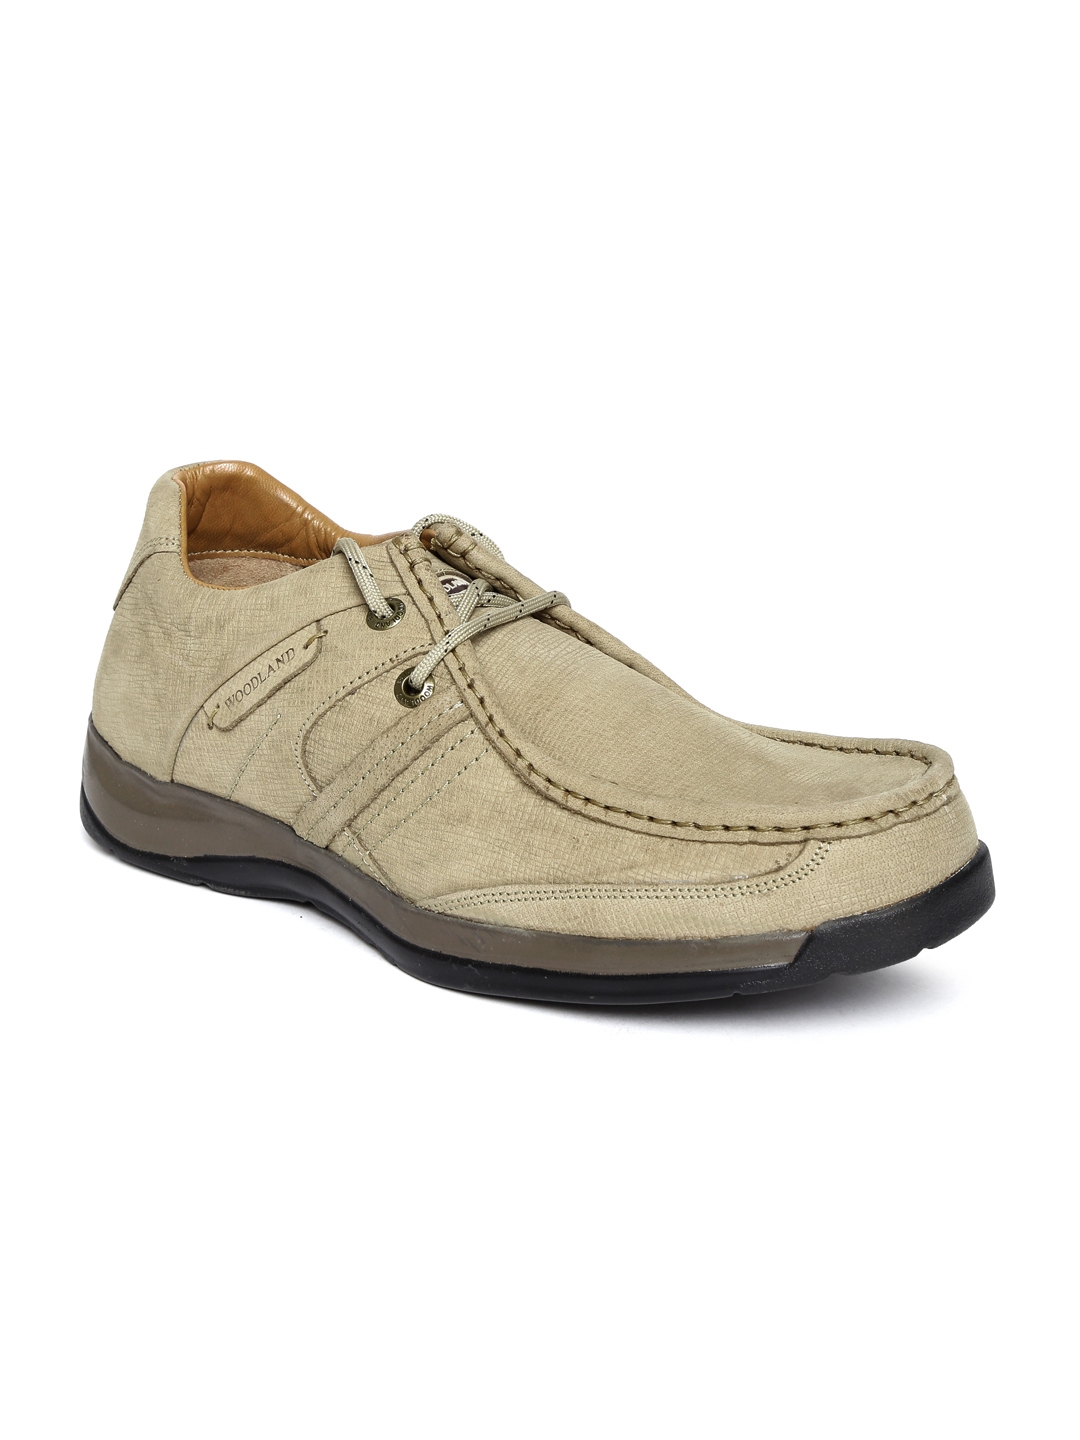 Woodland Loafers Colour Casual shoes for Men  Buy online from ShopnSafe